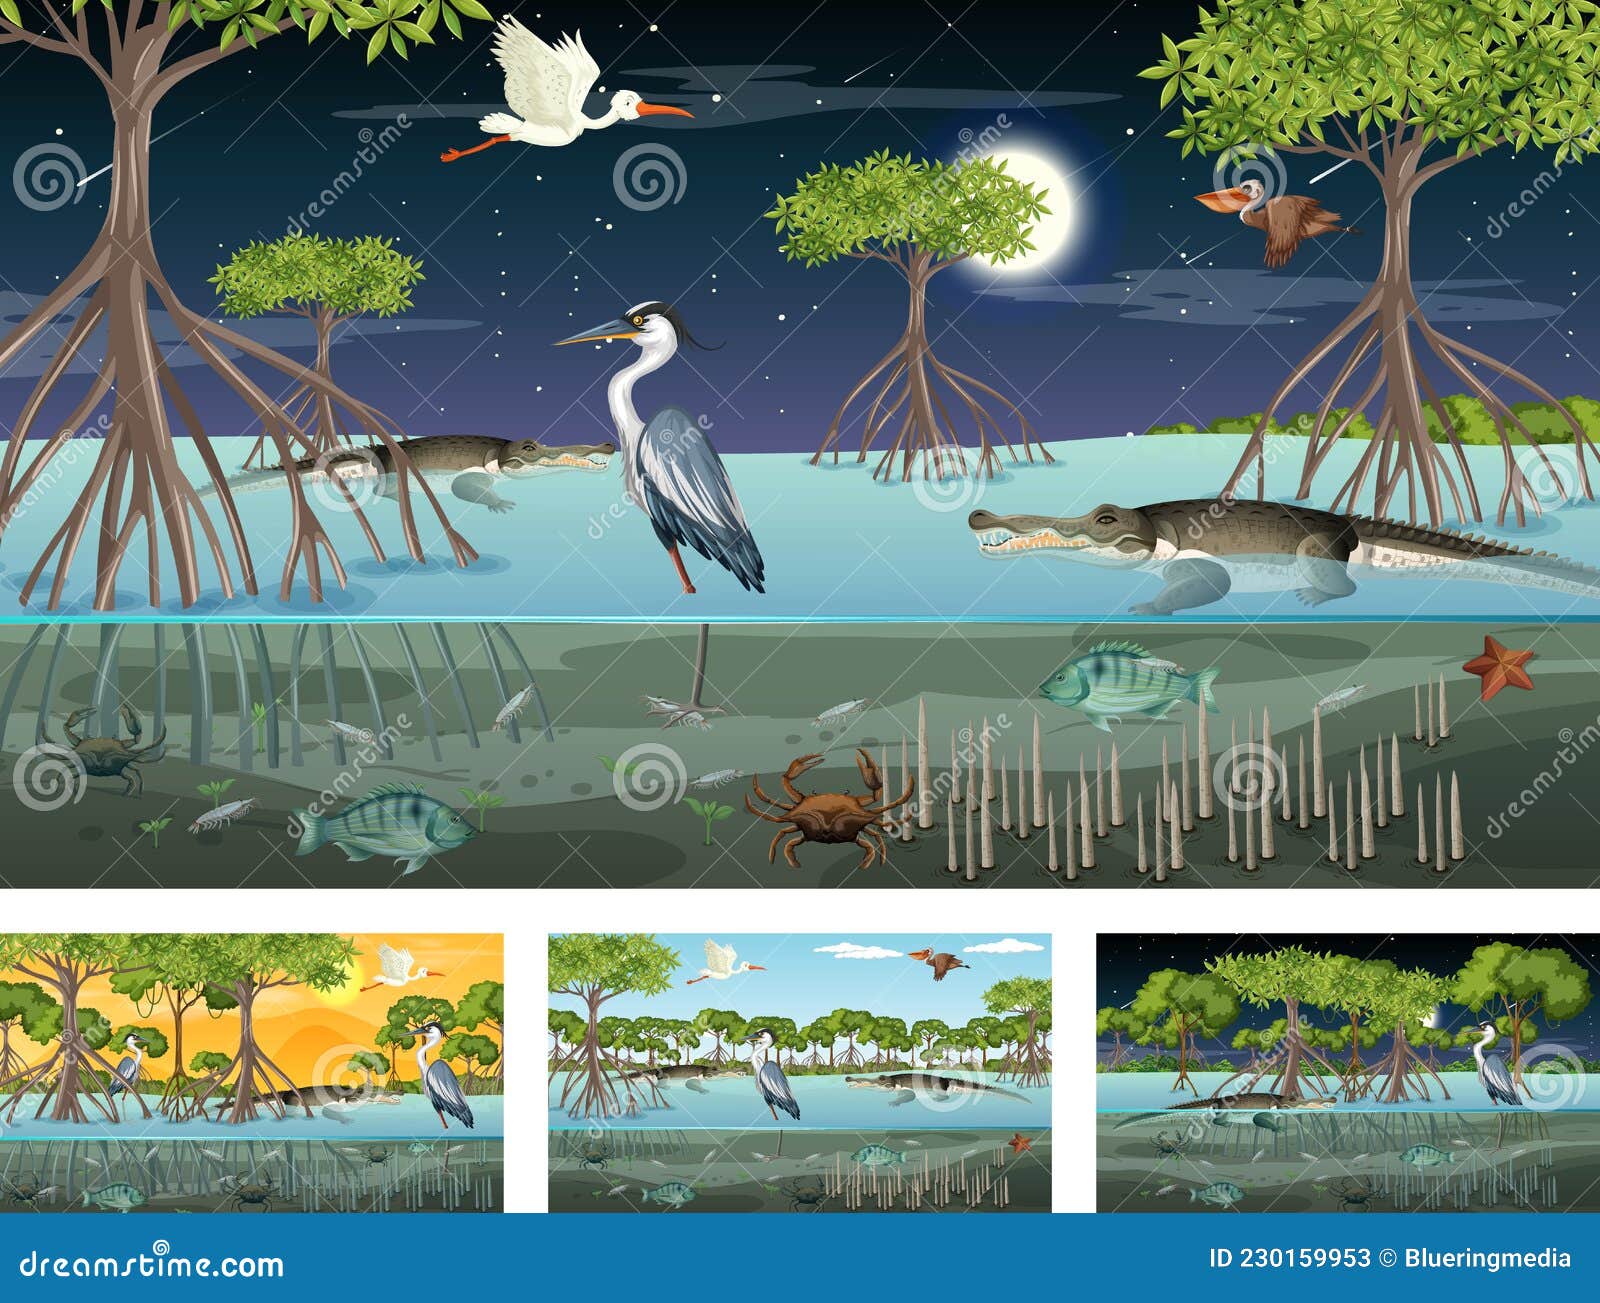 Different Mangrove Forest Landscape Scenes with Animals and Plants ...